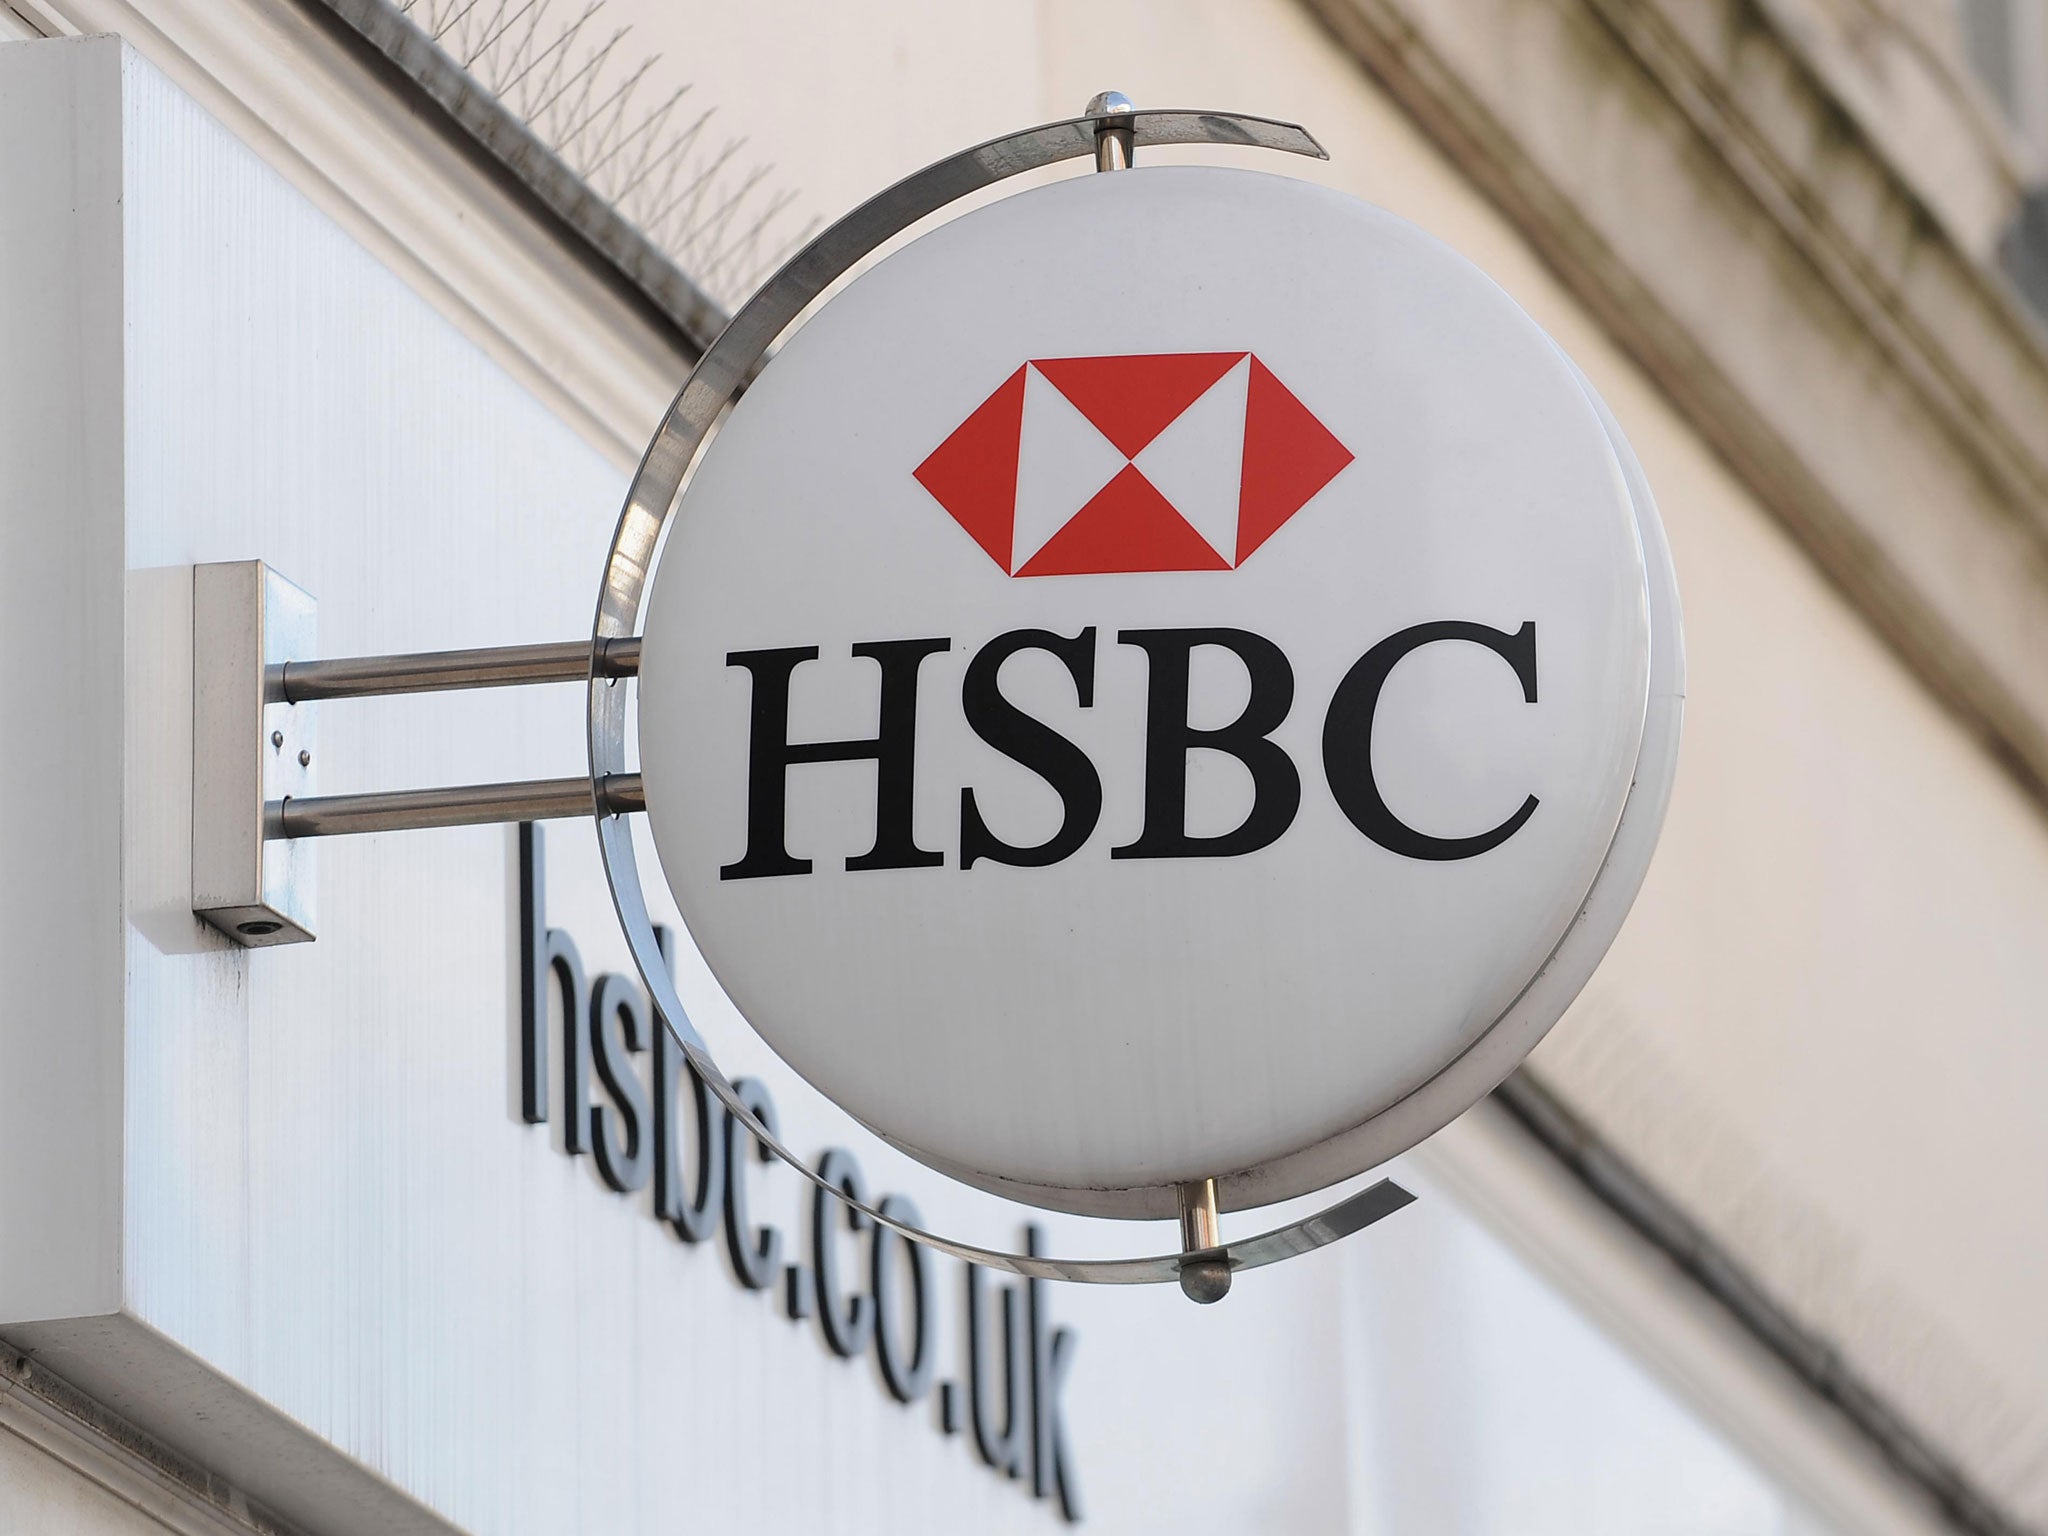 Profits almost double to $8.4bn at HSBC